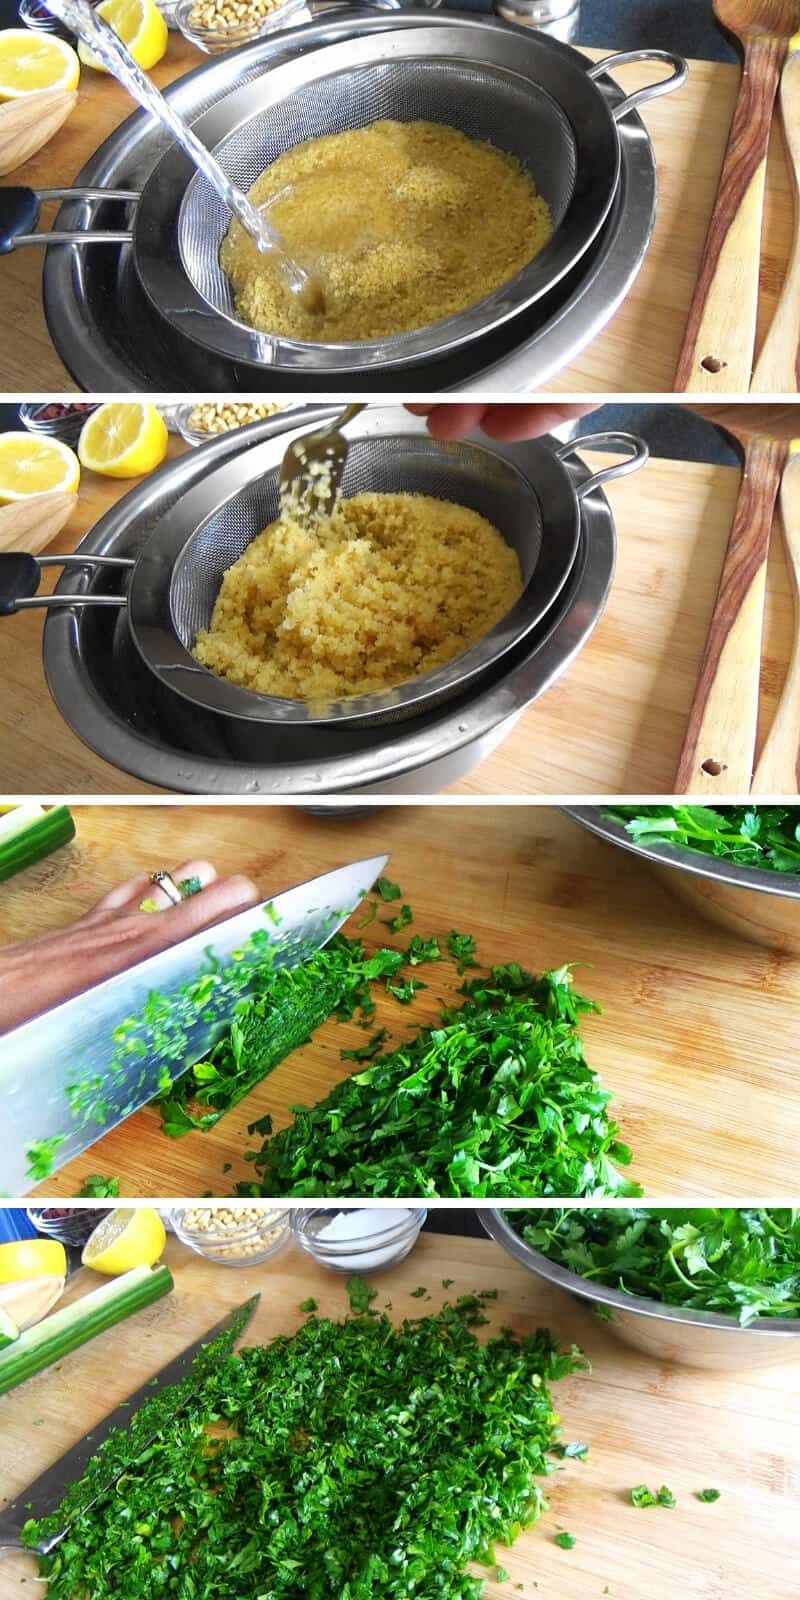 Preparation of the bulgur and chopping of parsley to make the tabouli salad.